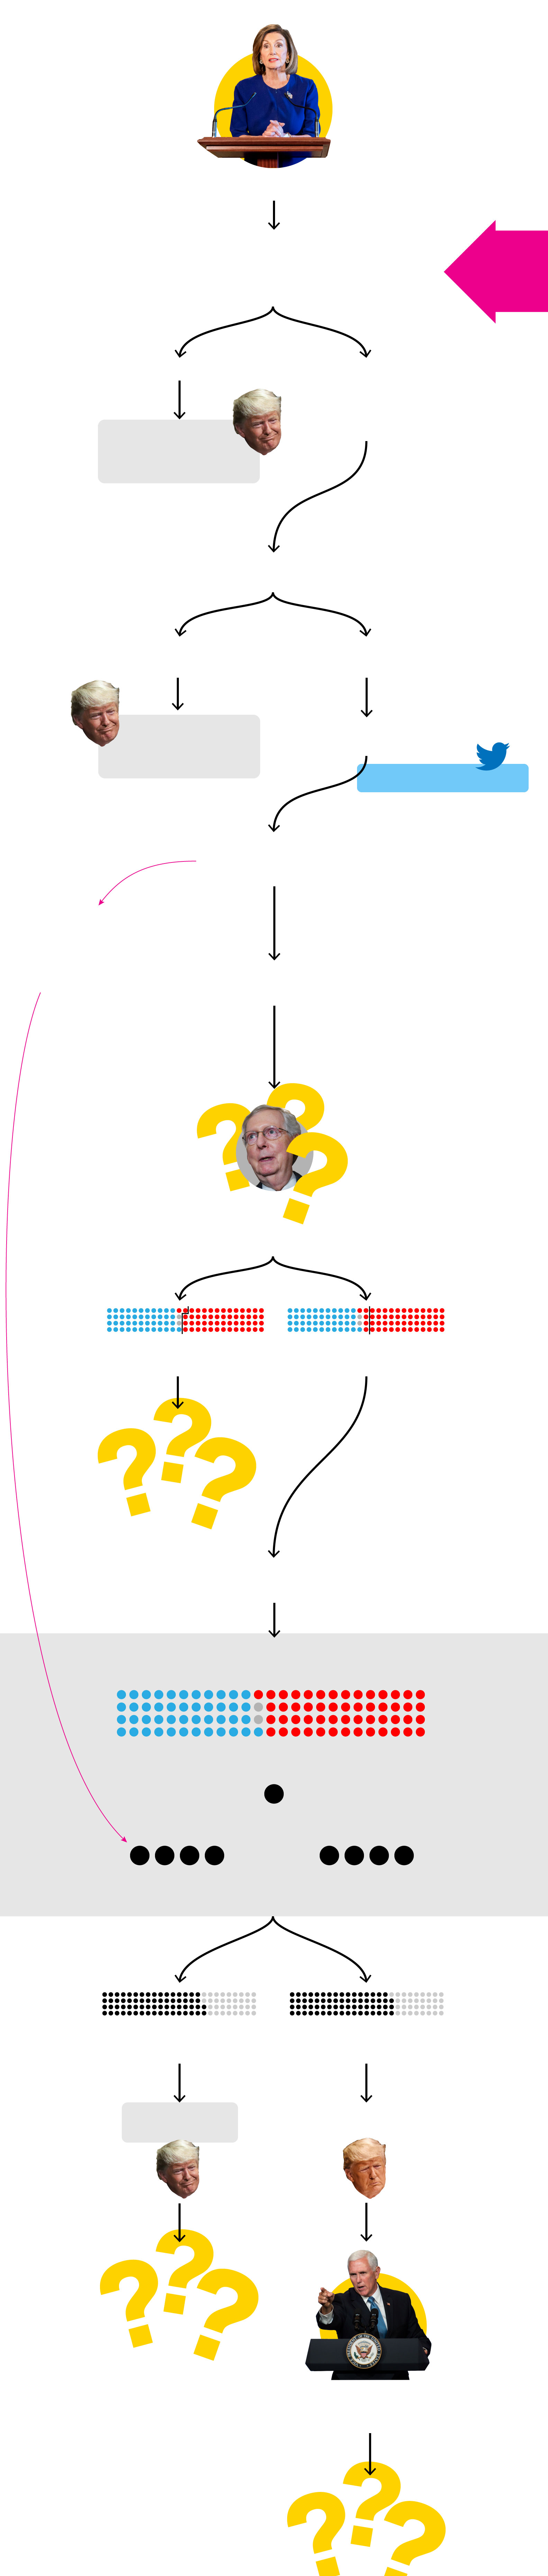 Confused By The Impeachment Process? This Flowchart Should Help.